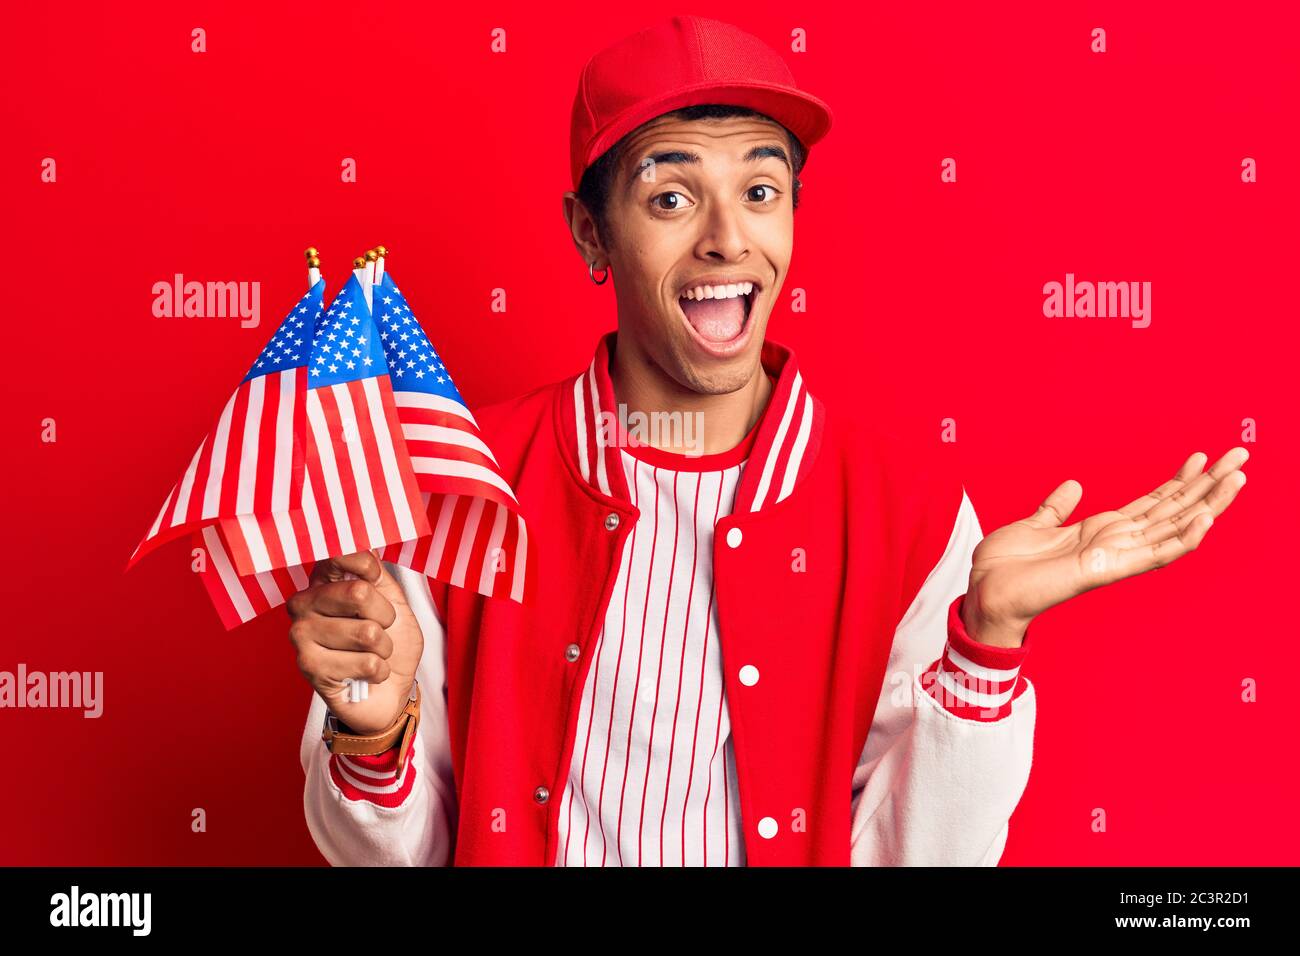 Young african amercian man wearing baseball uniform holding america flags celebrating achievement with happy smile and winner expression with raised h Stock Photo